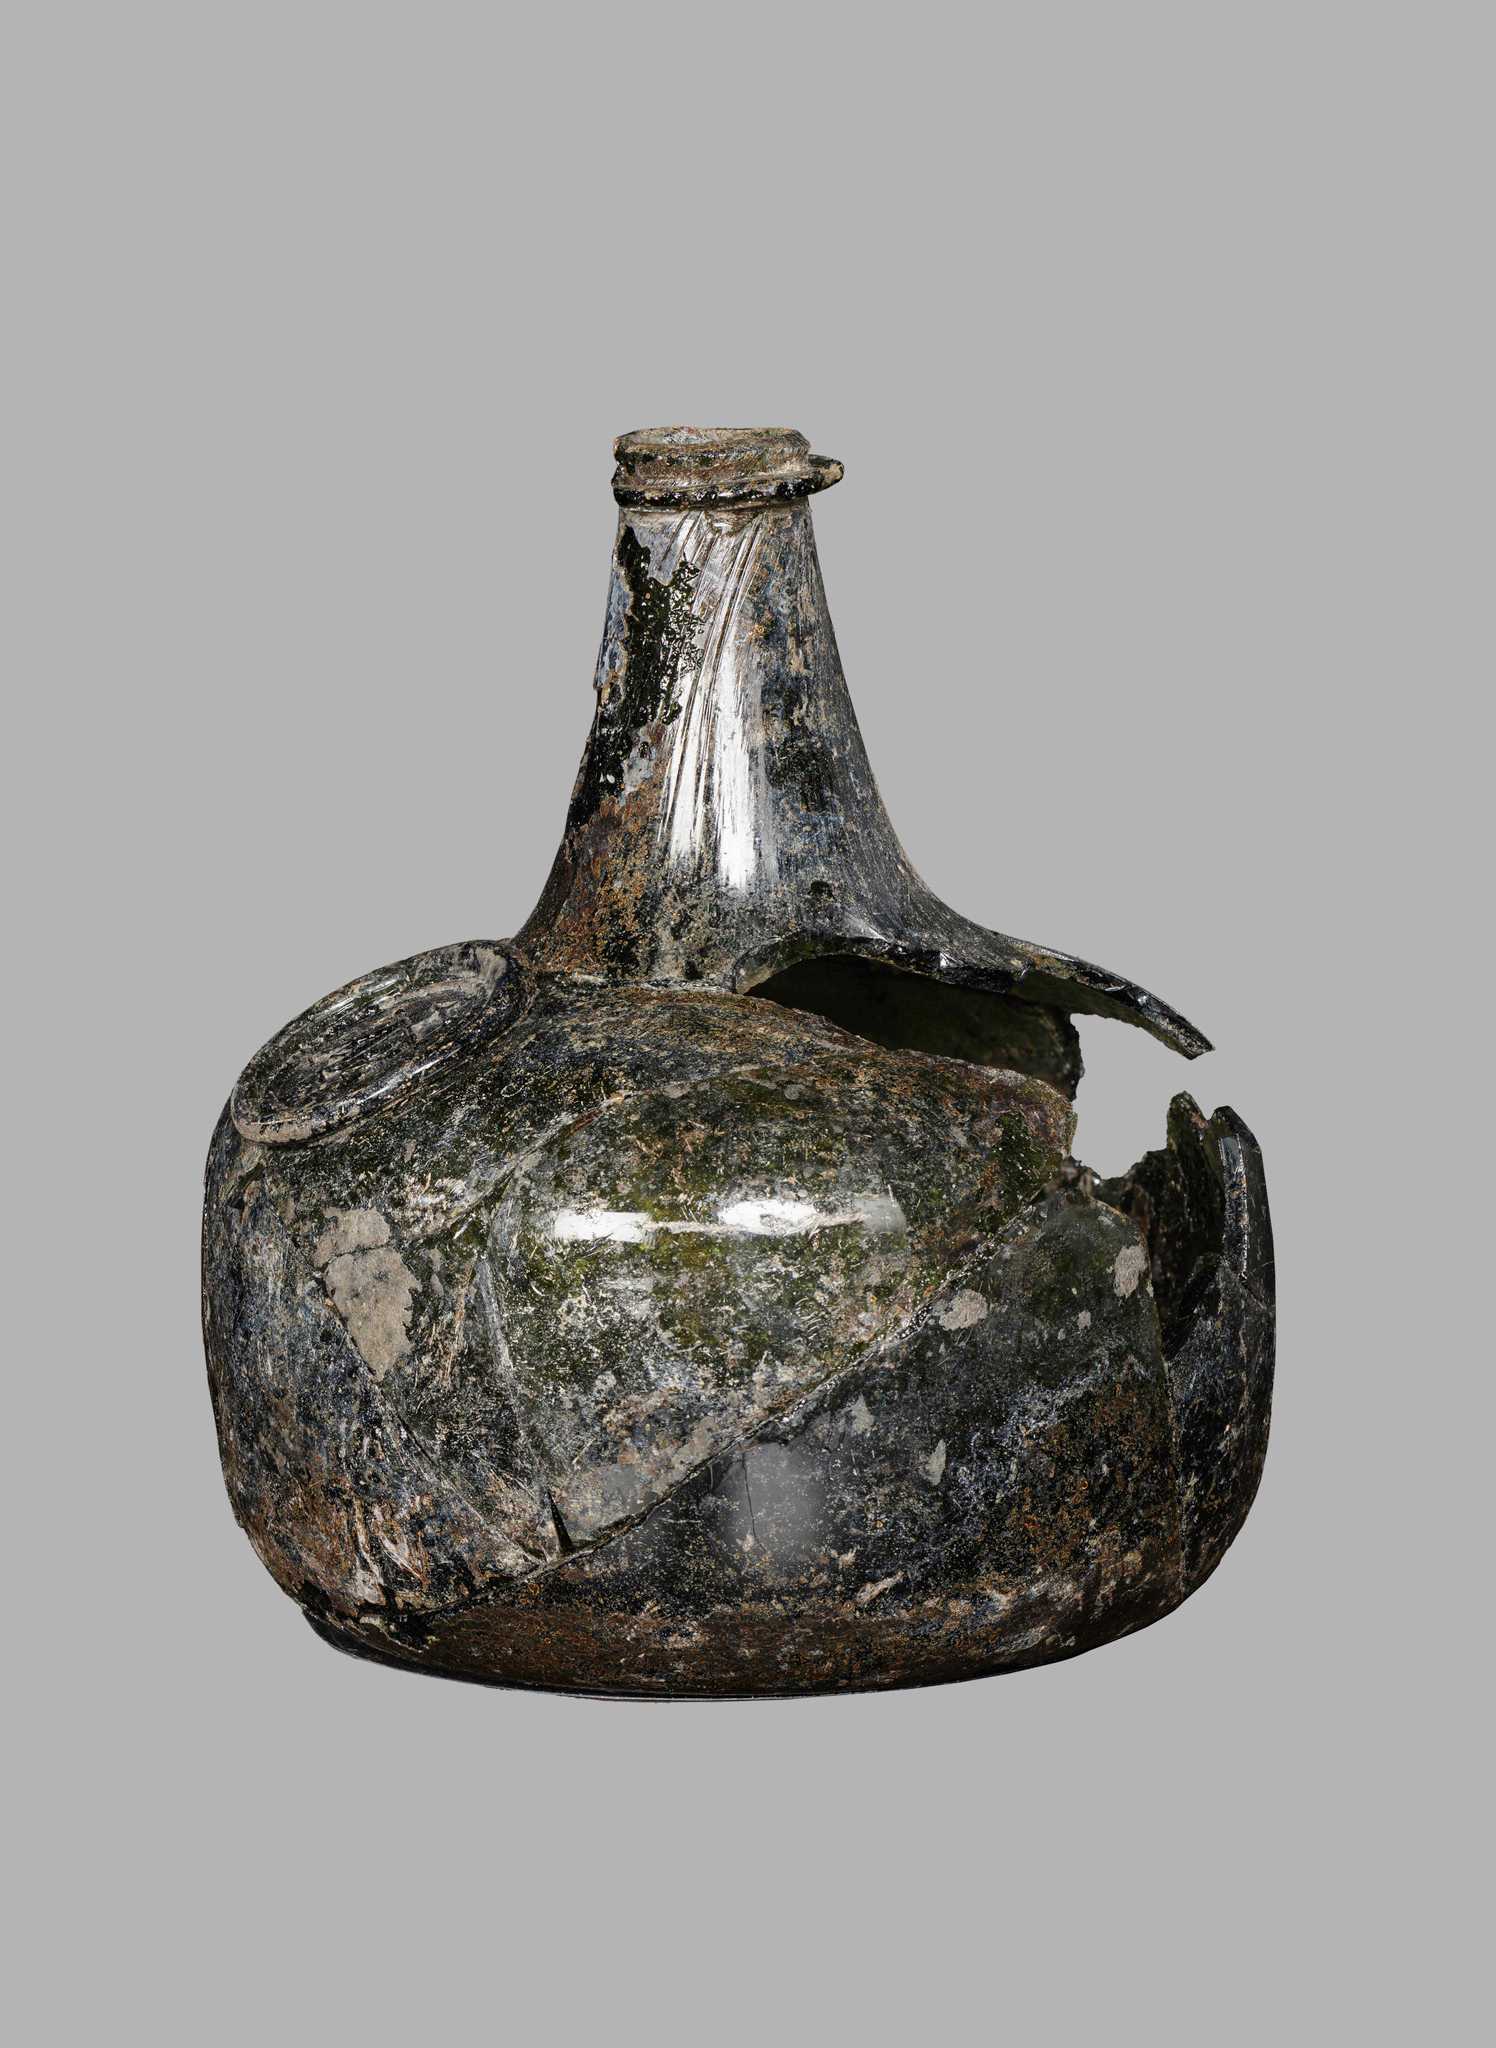 Photograph of a wine bottle found at "Bacon's Castle"